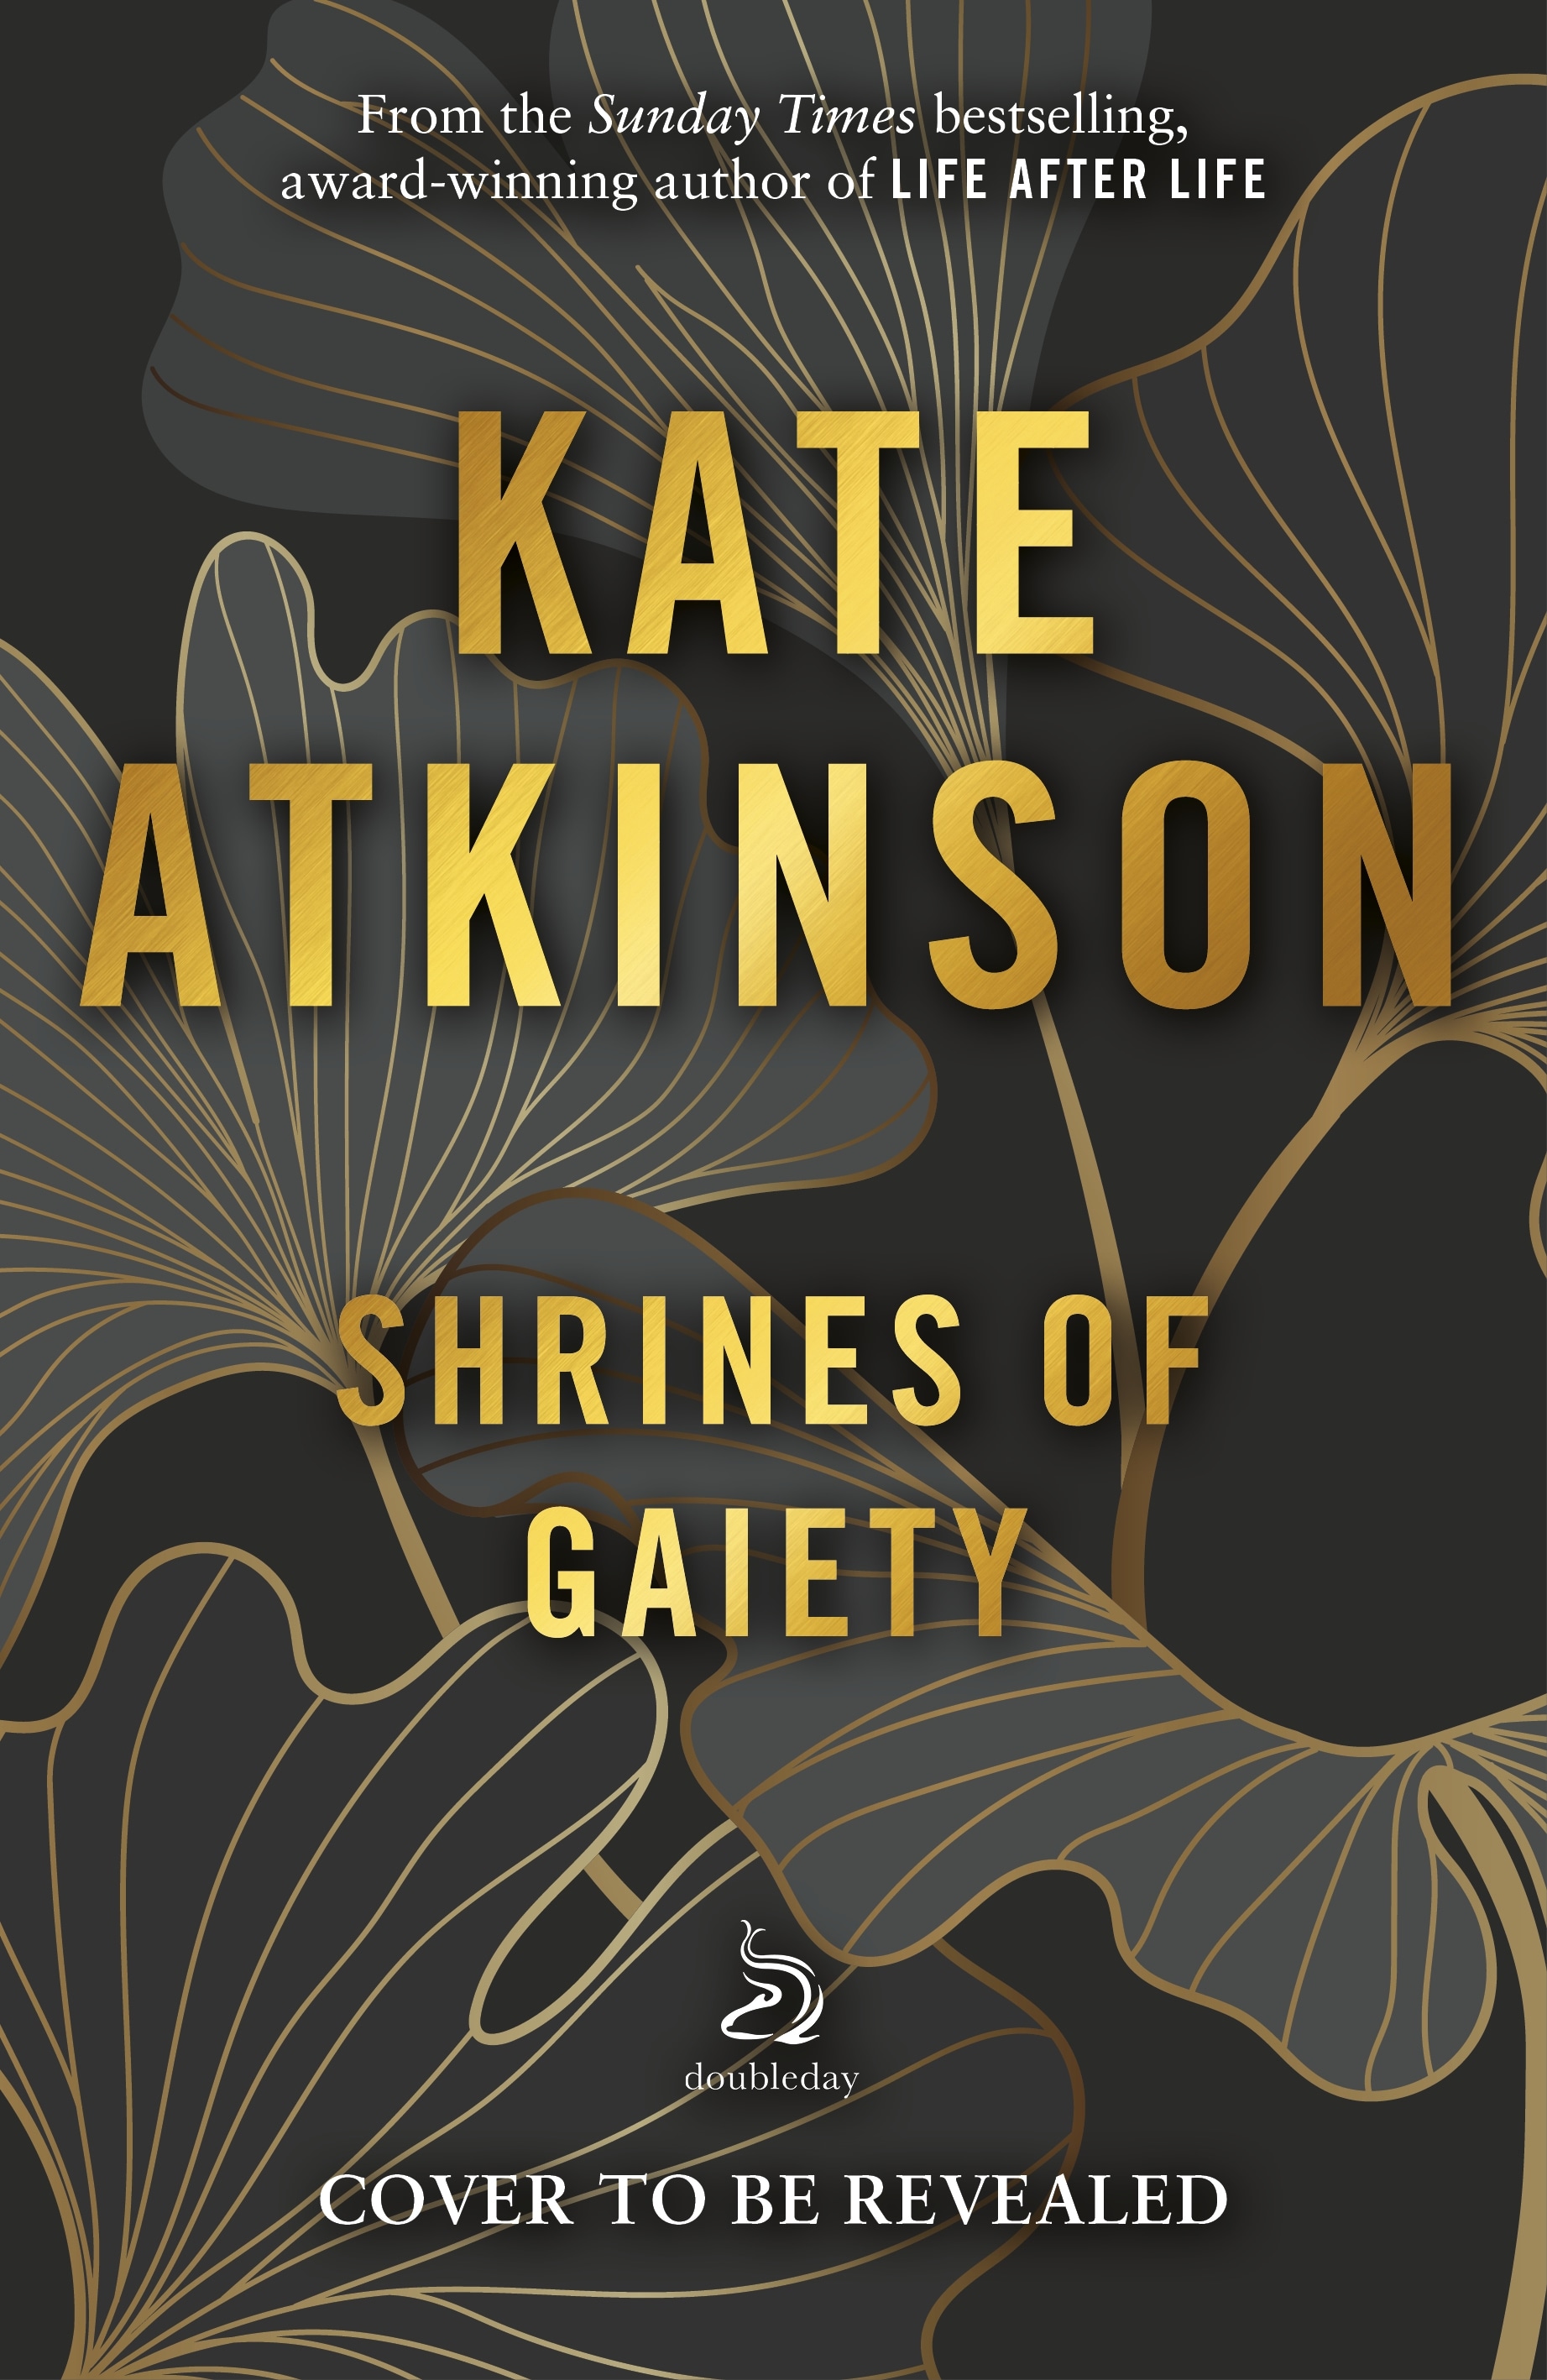 Book “Shrines of Gaiety” by Kate Atkinson — September 27, 2022